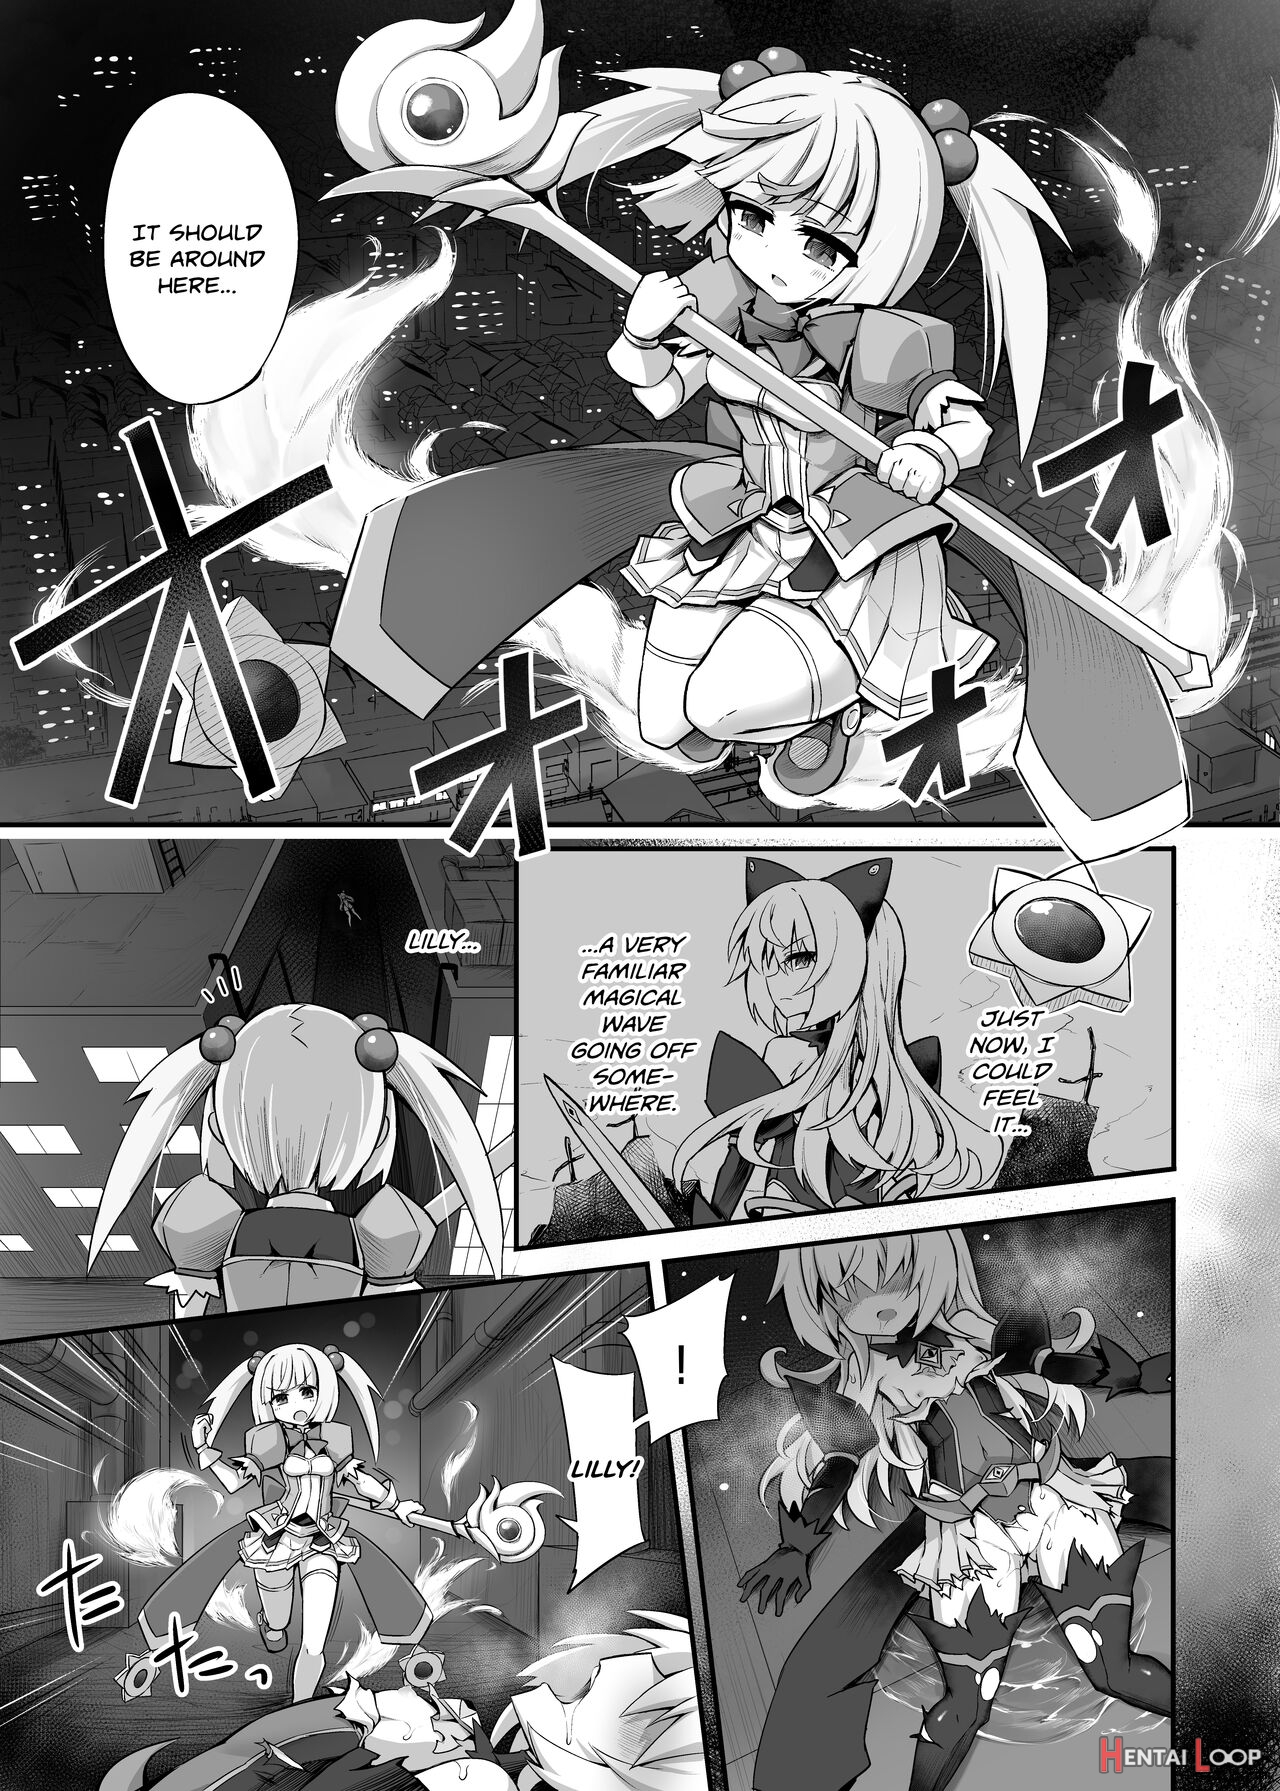 Masochist Cat X Magic Girl ~a Manga In Which The Evil Magical Girl Is Put On A Leash And Domesticated By The Good Magical Girl~ page 8